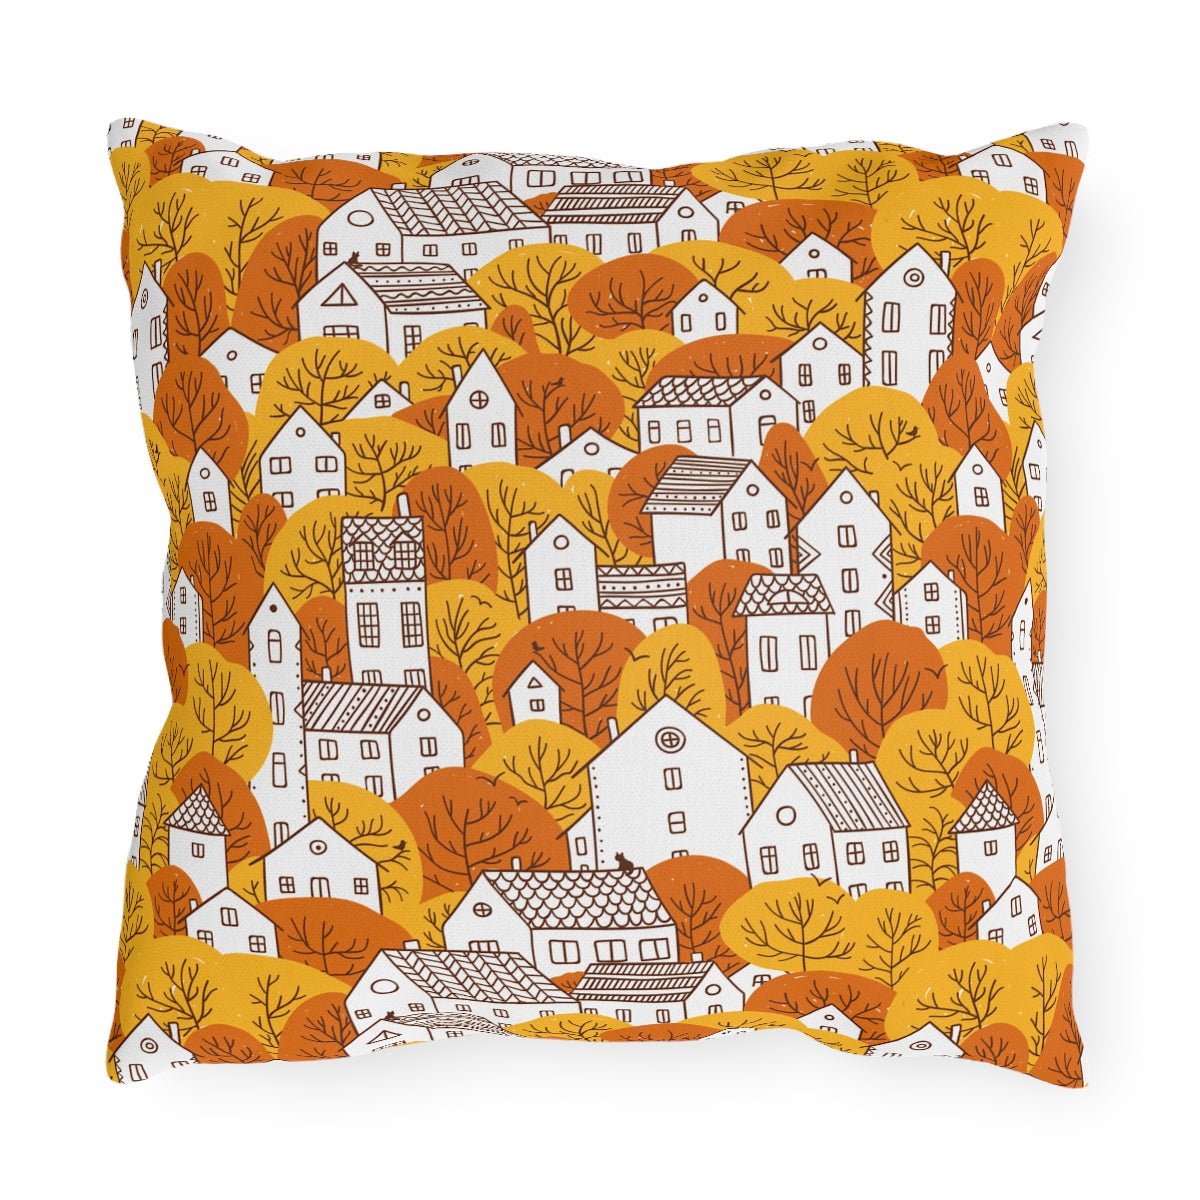 Fall Nordic Houses Outdoor Pillow - Puffin Lime